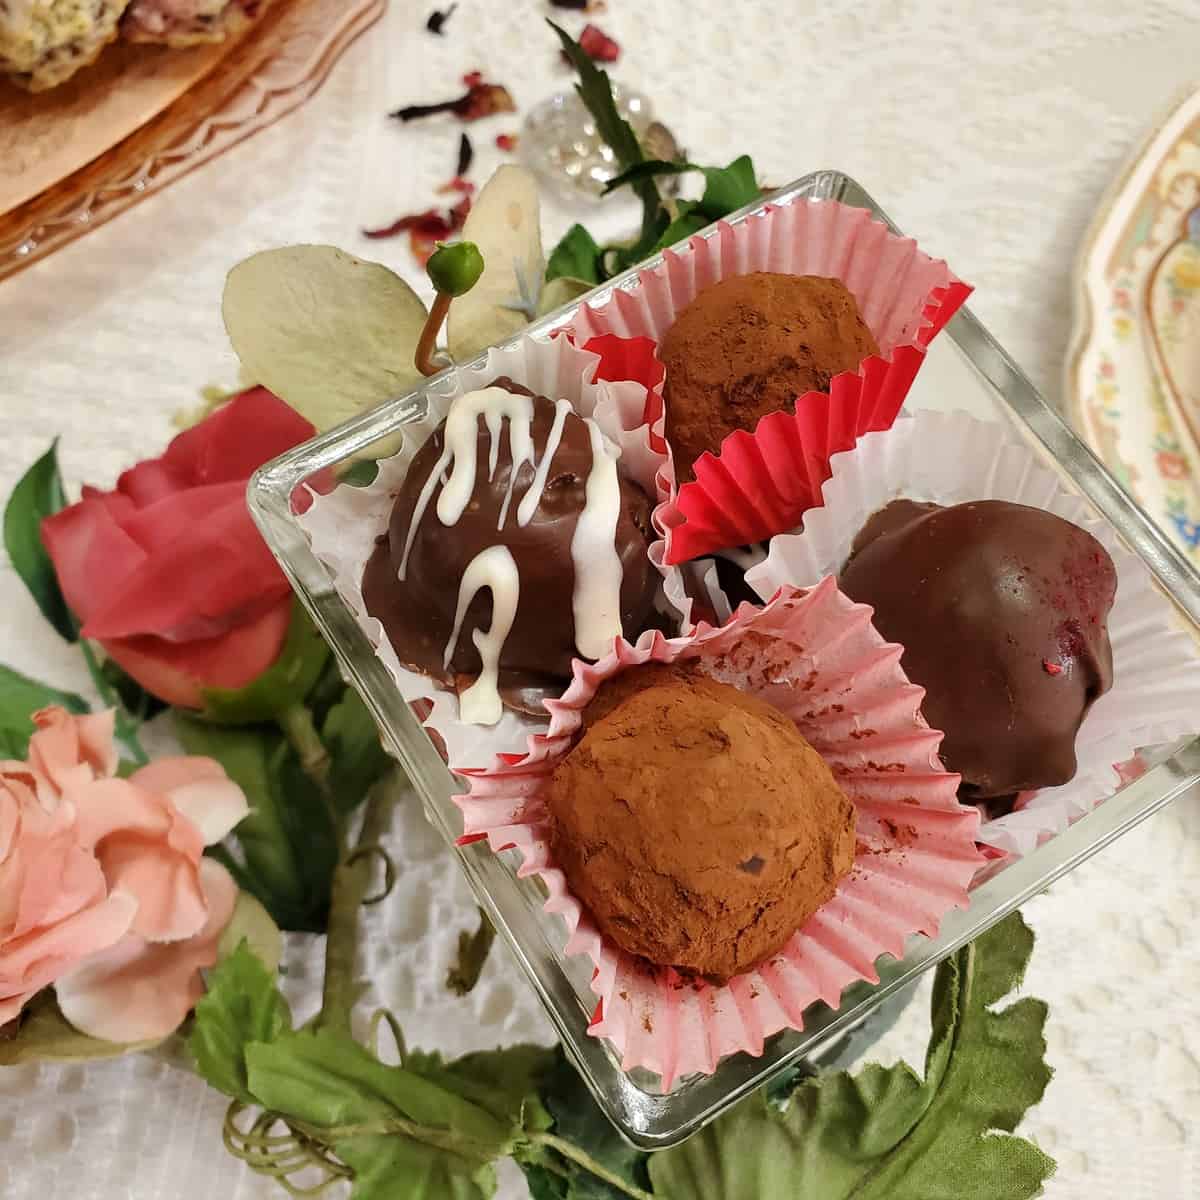 Serving Homemade Chocolate Truffles for a Tea Party